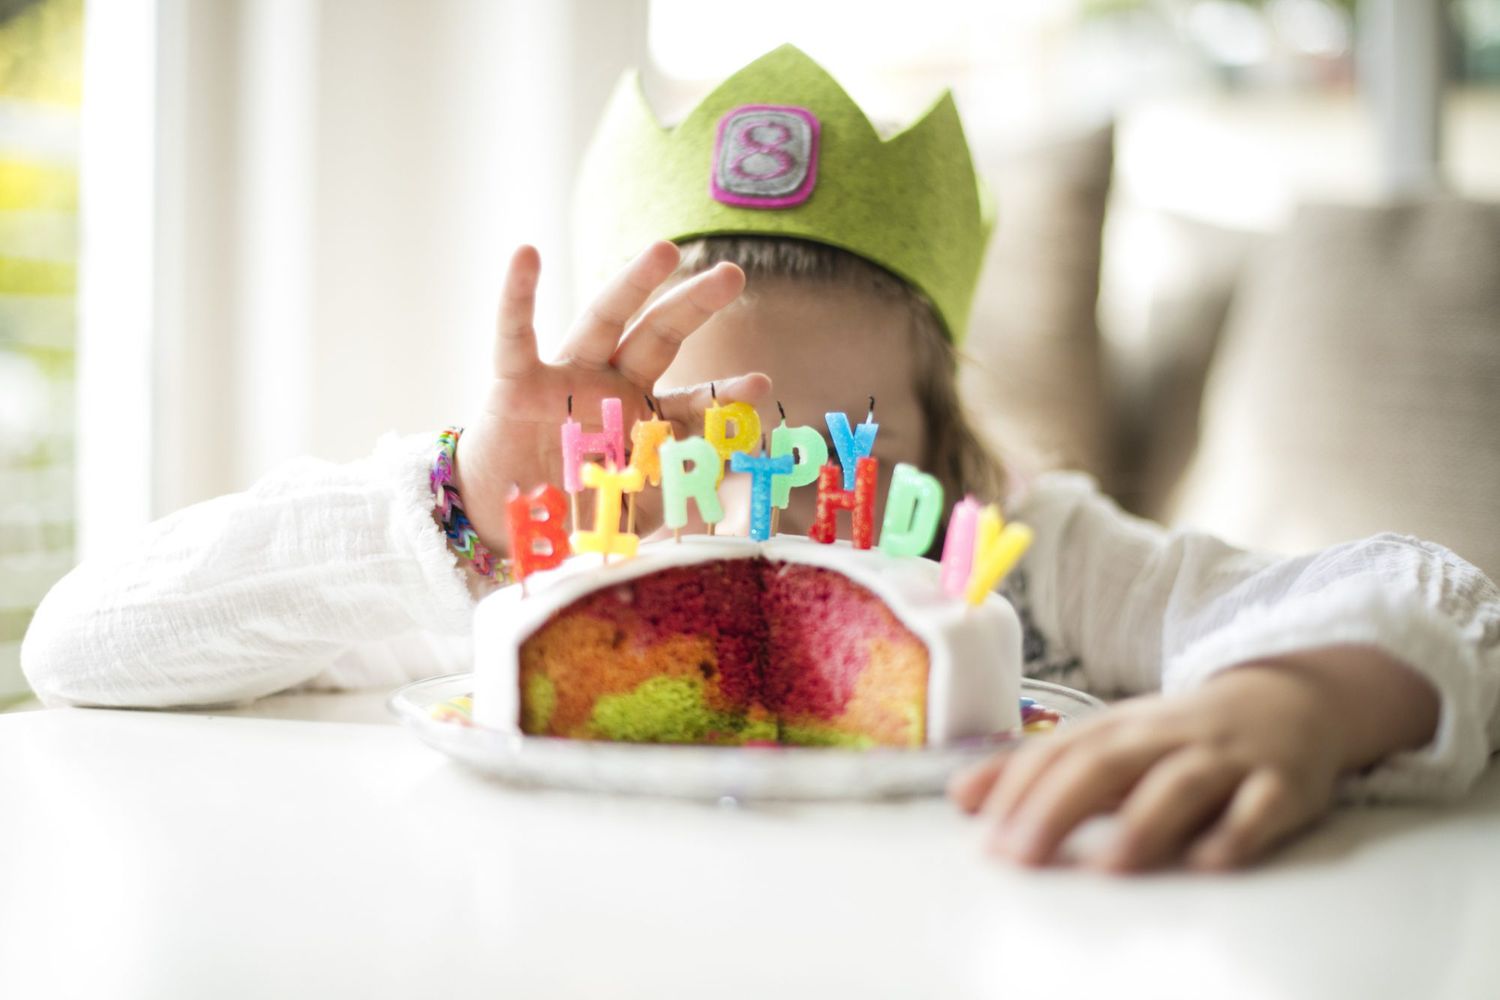 An image of a child behind a birthday cake.